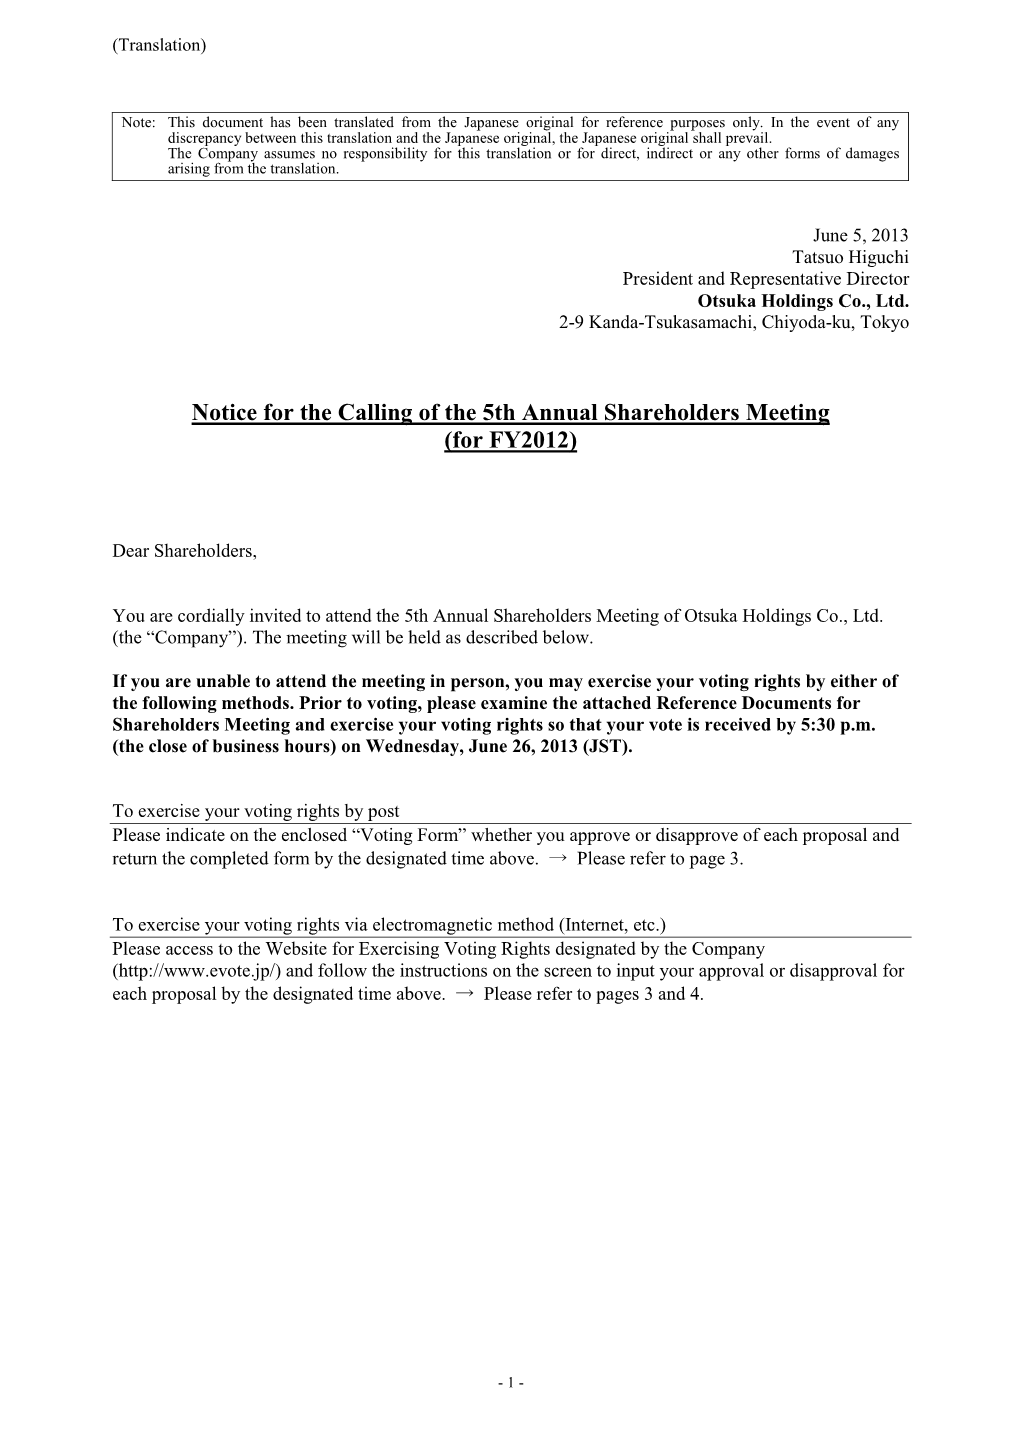 Notice for the Calling of the 5Th Annual Shareholders Meeting (For FY2012)